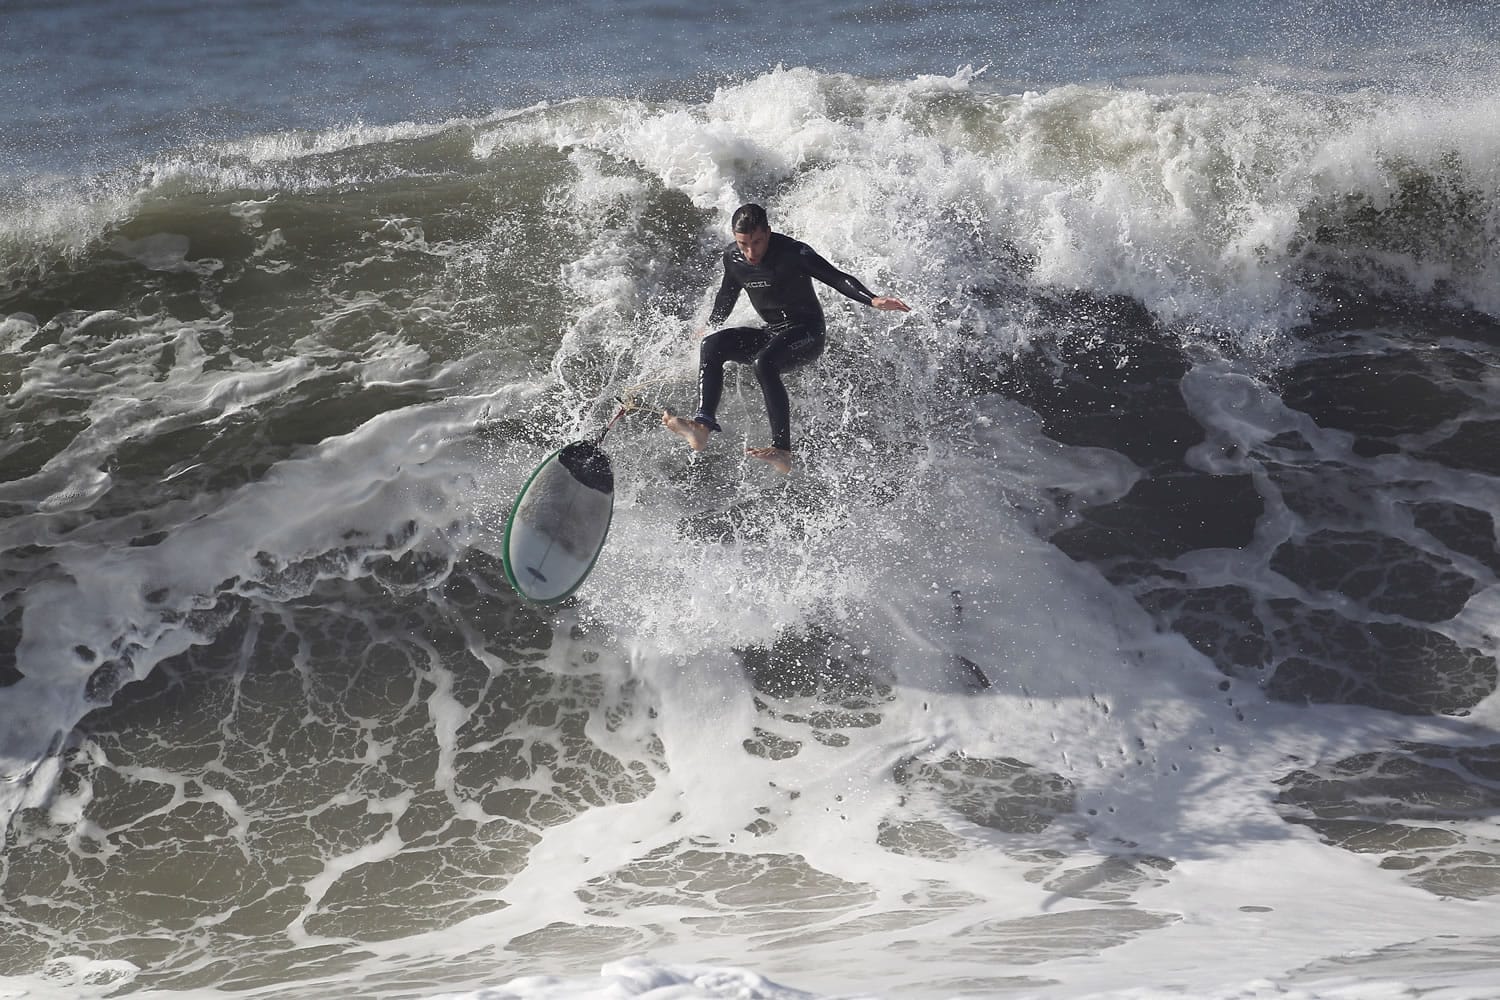 Nick Ut/Associated Press
A surfer wipes out from a large wave at Seal Beach on Wednesday. The National Weather Service said beaches stretching 100 miles up the Southern California coast would see large waves and rip currents.